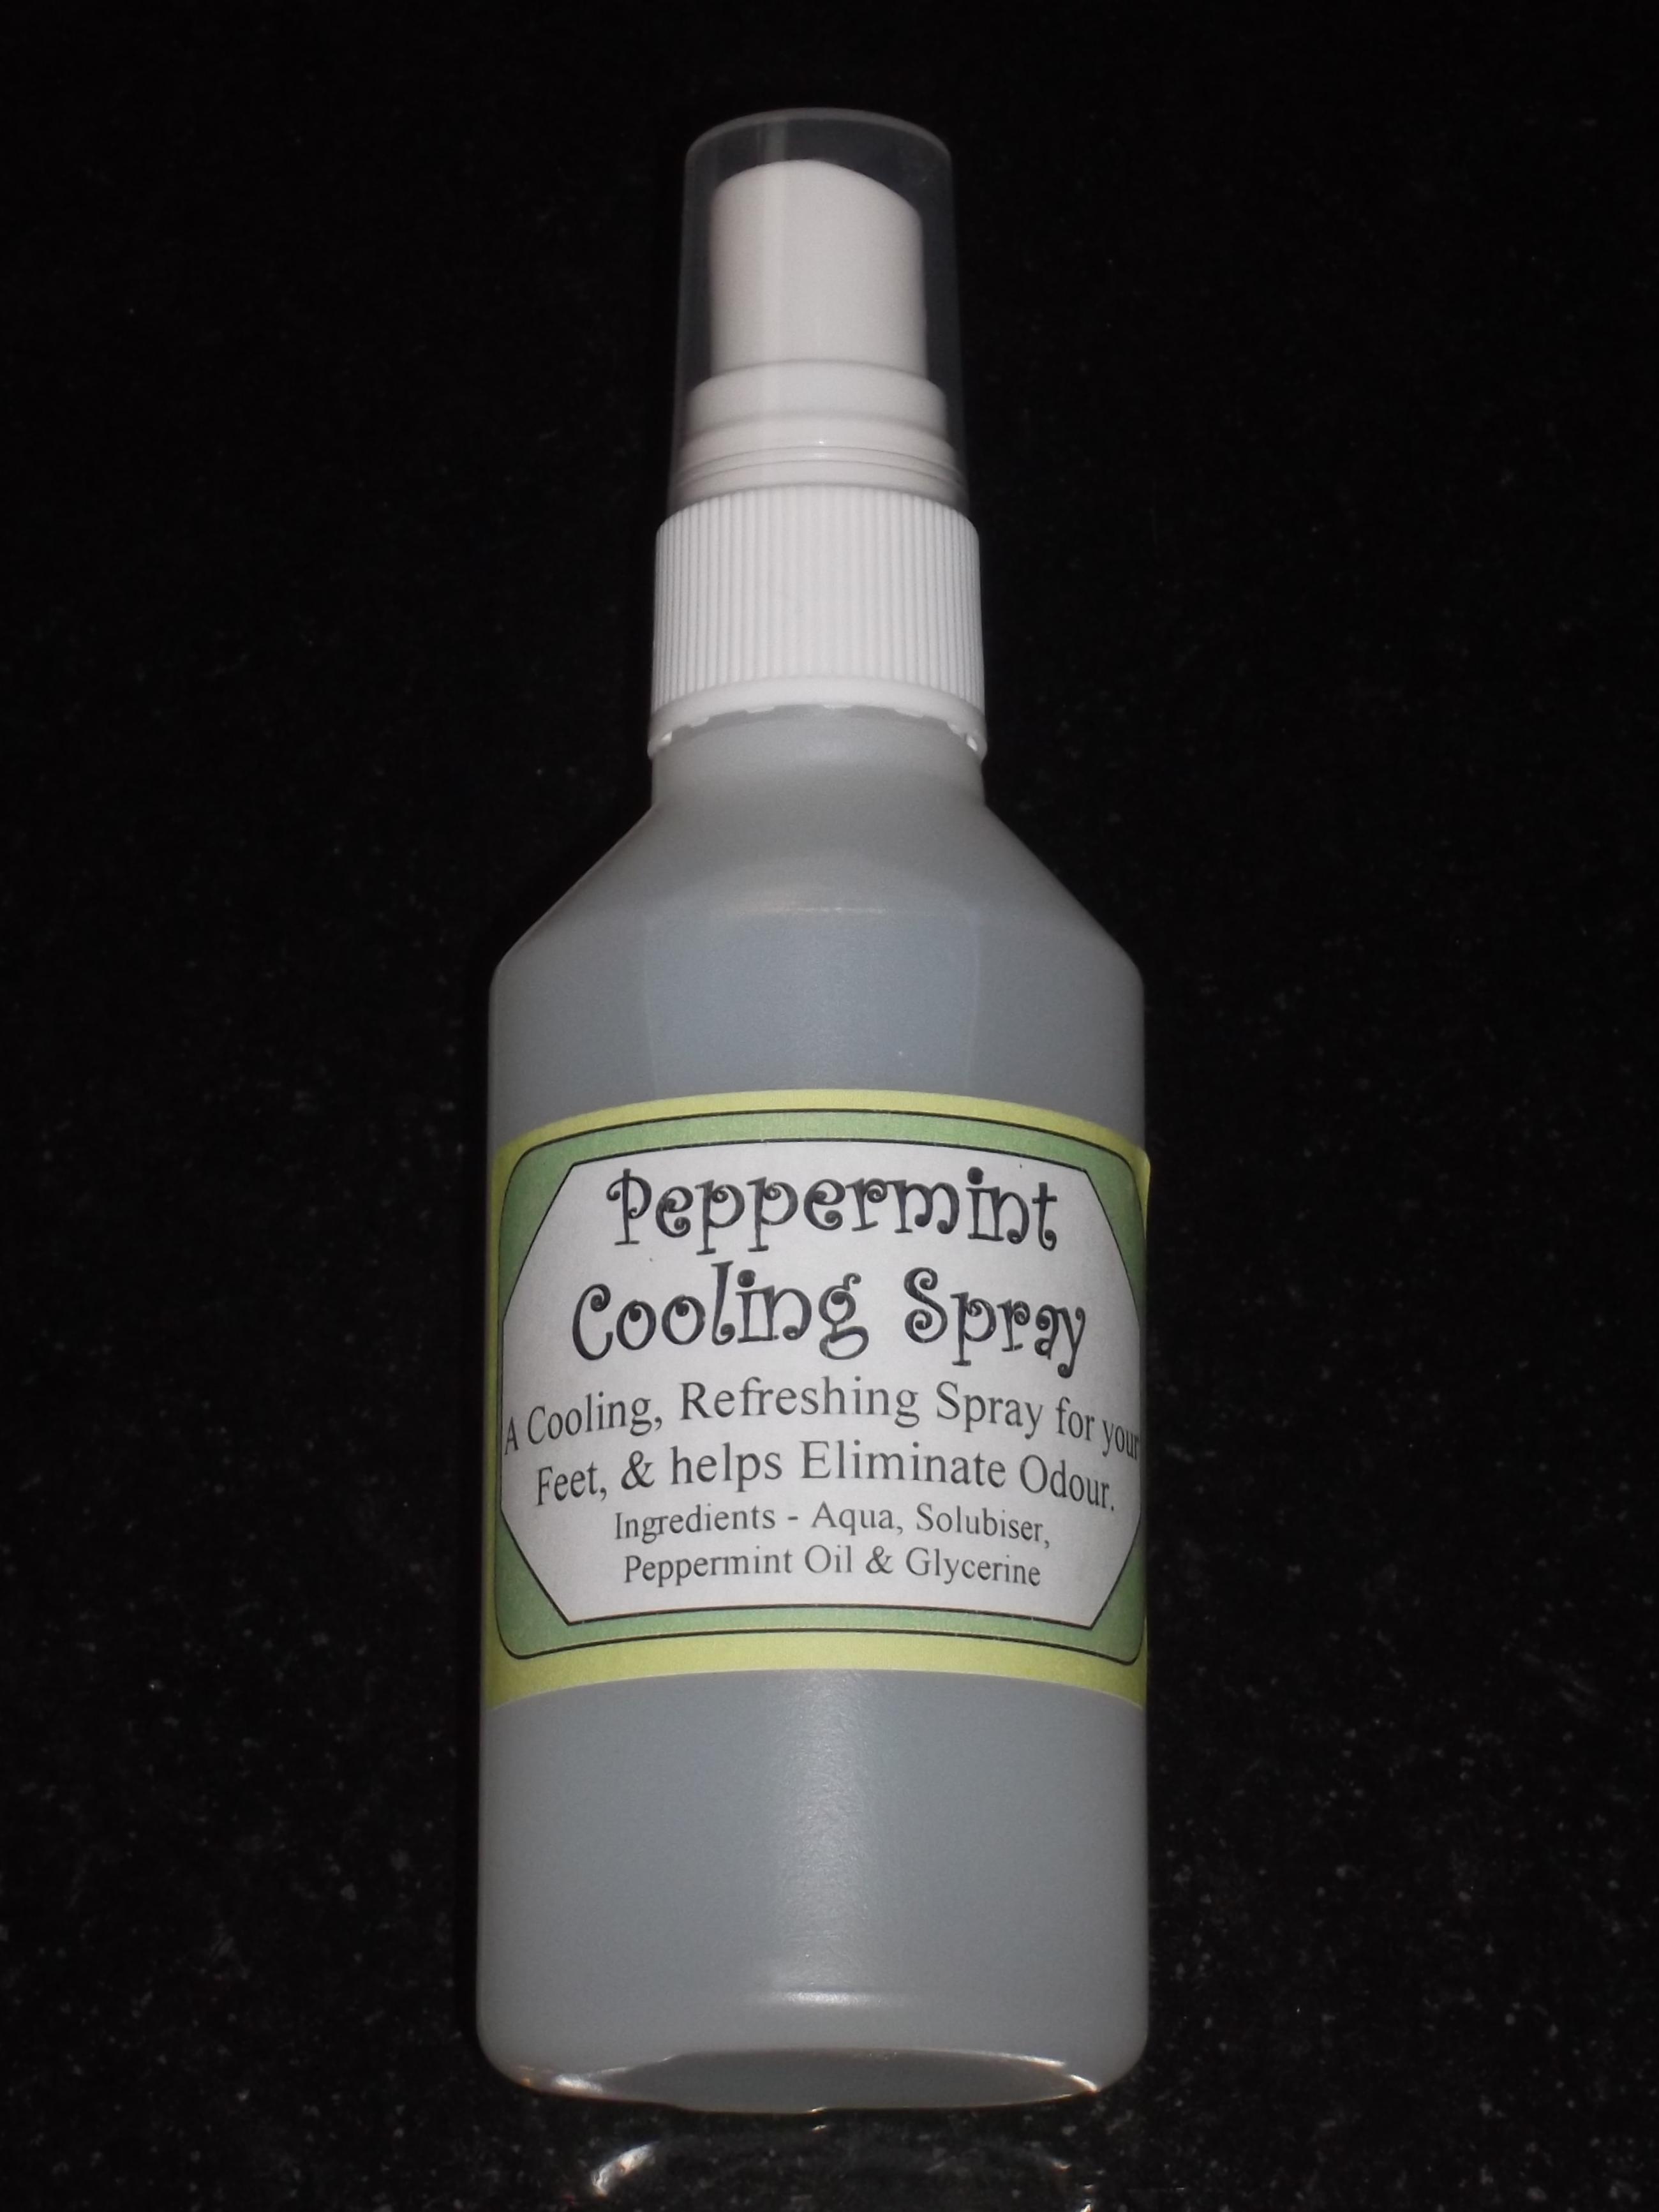 Peppermint Cooling spray